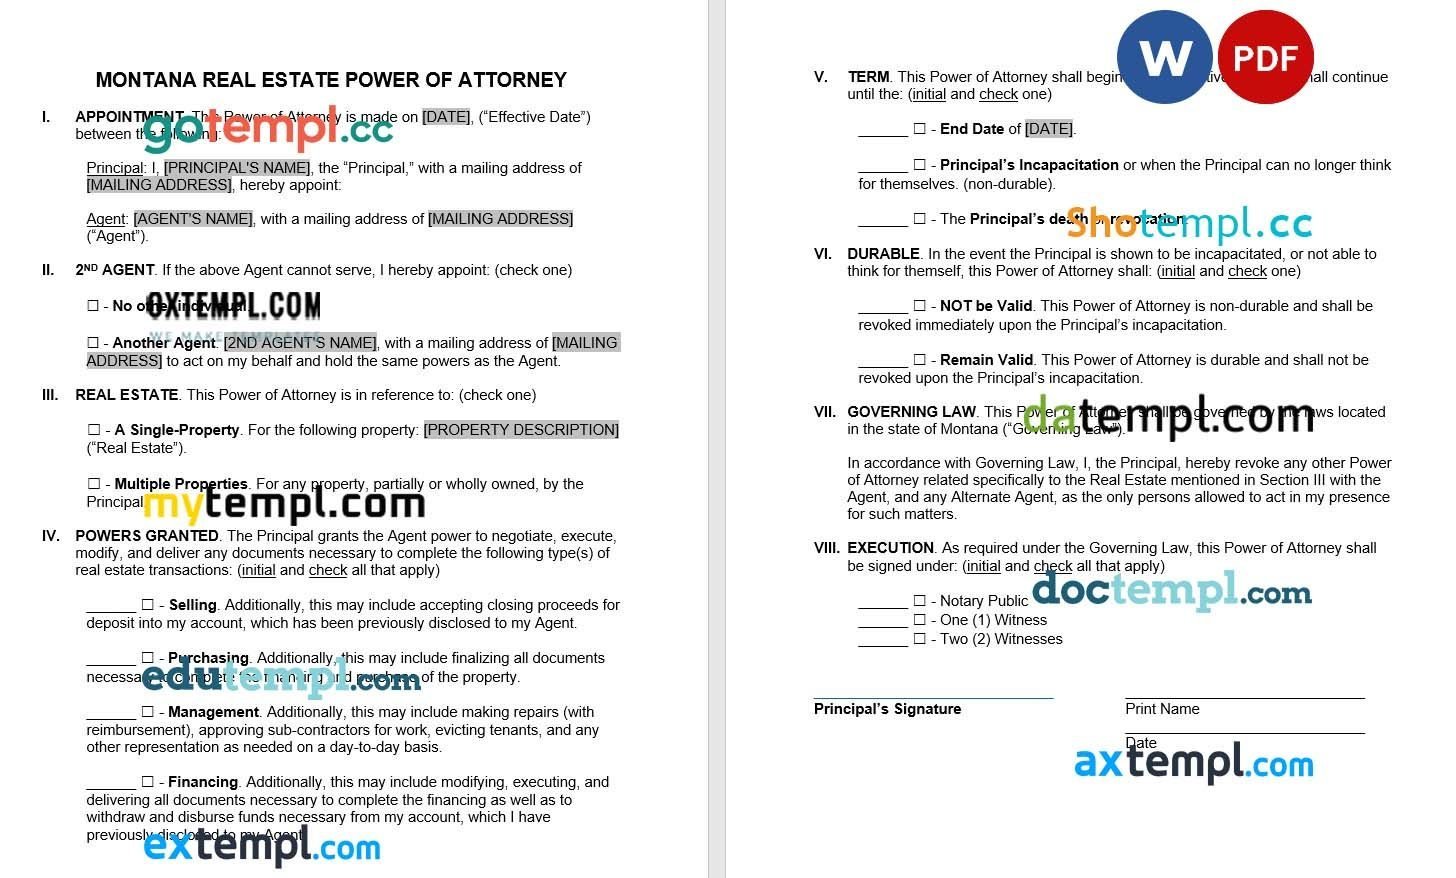 Montana Real Estate Power of Attorney Form example, fully editable